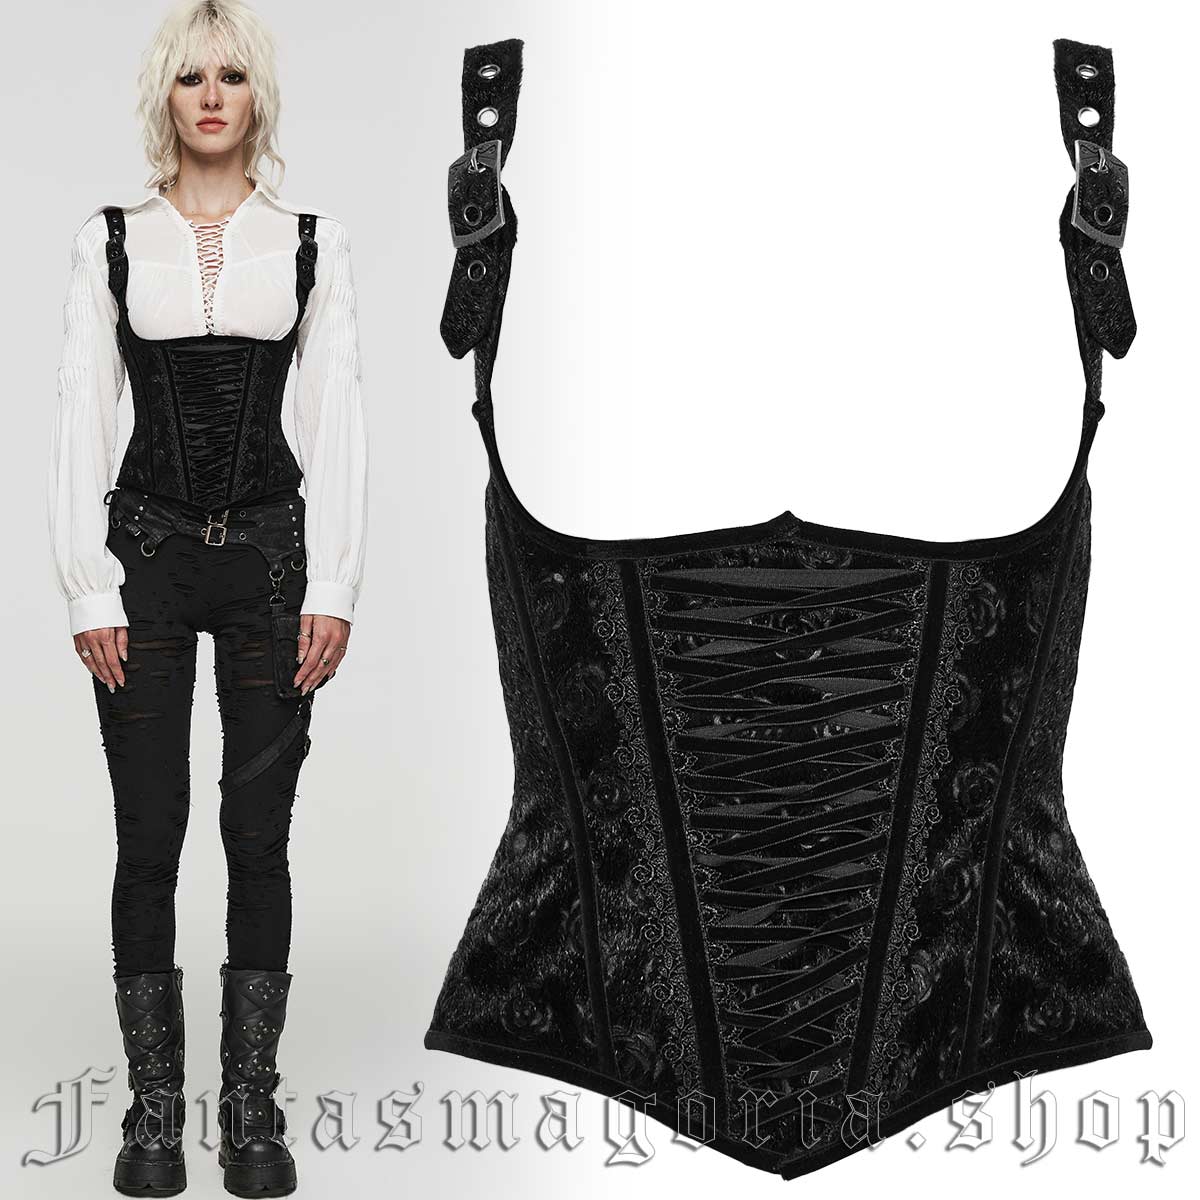 Black and Red Rose-Patterned Gothic Underbust Corset with Straps 